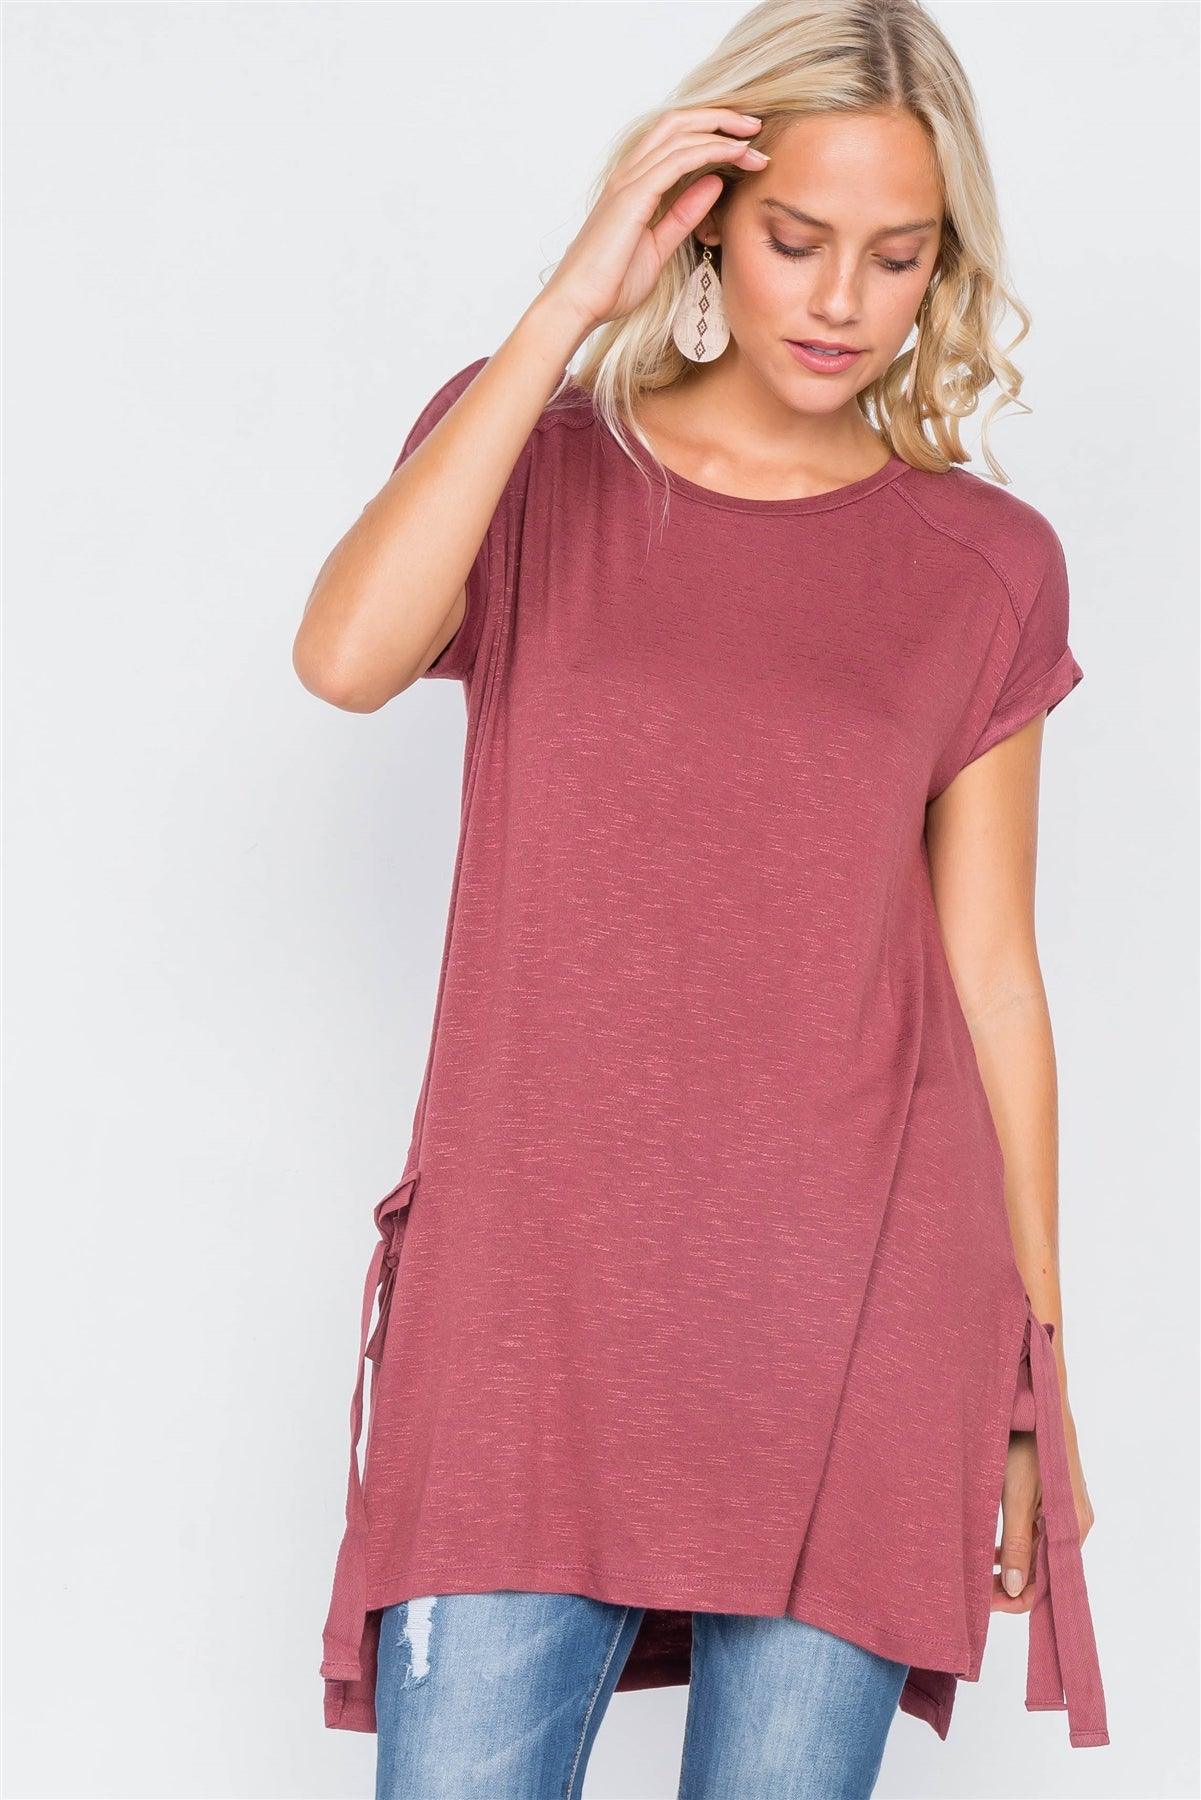 Wine Rose High-Low Rolled Sleeves Side Slit Self-Tie Tunic Top /2-2-2